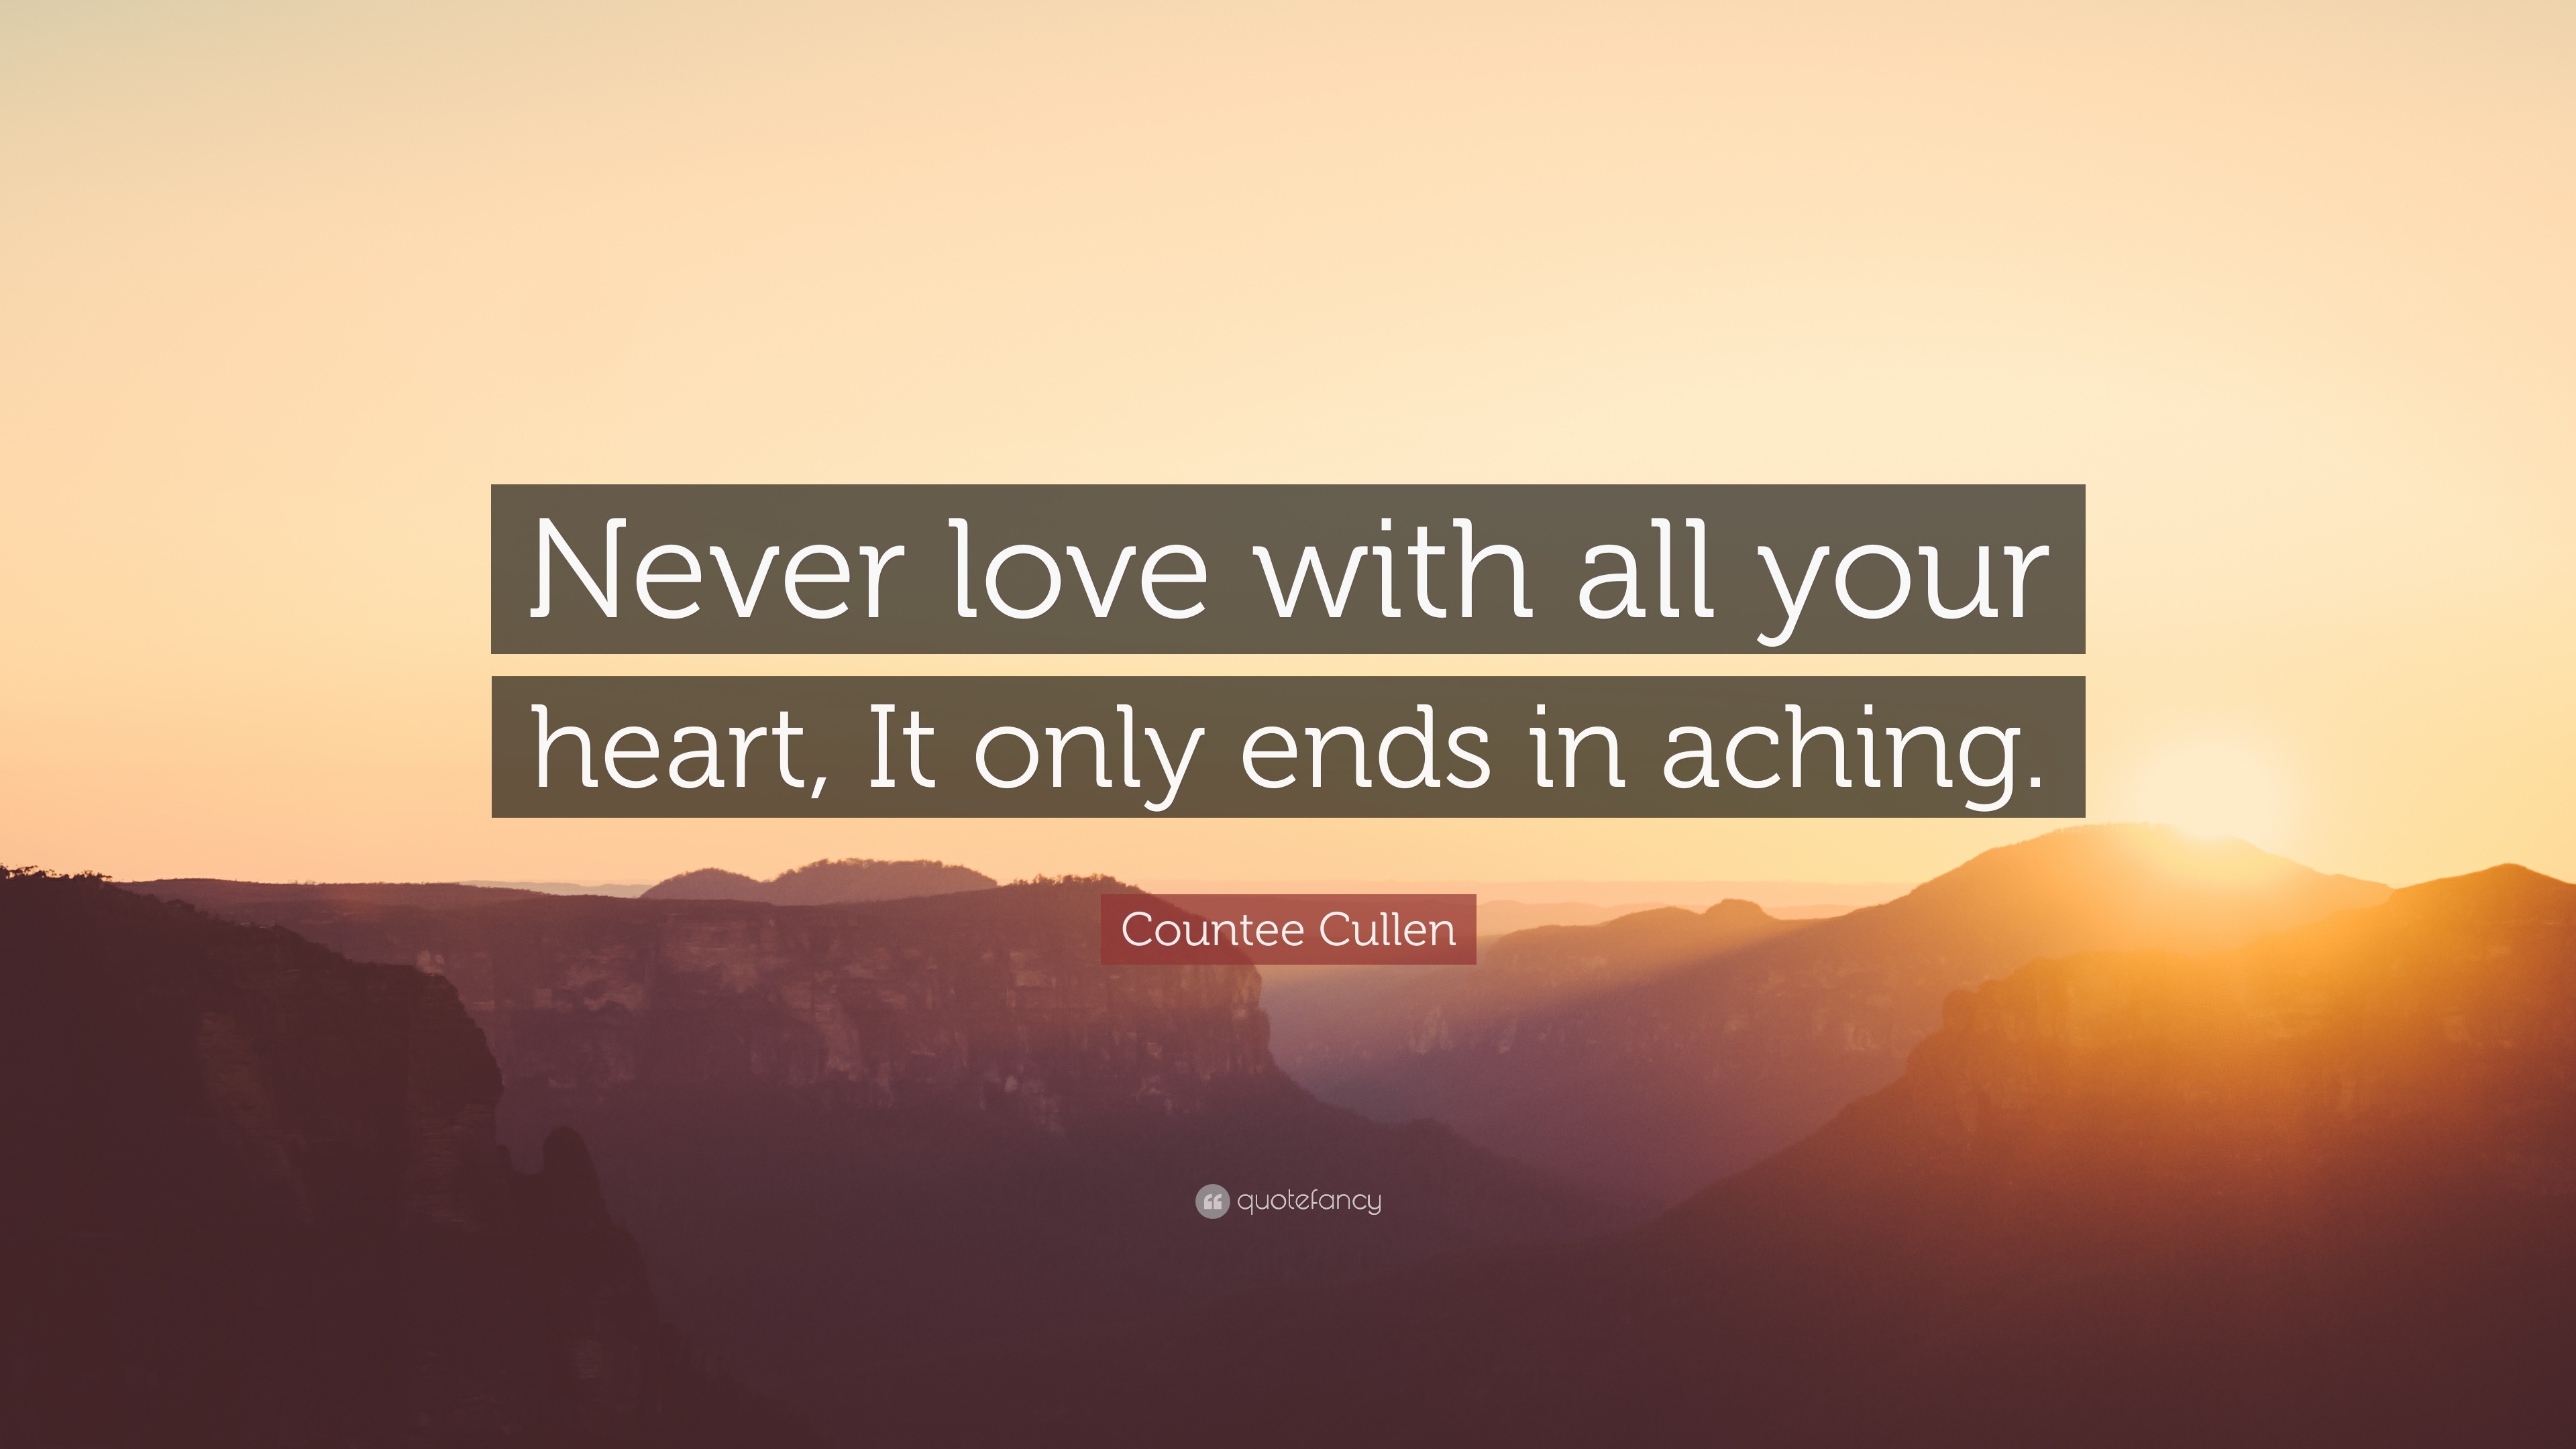 Countee Cullen Quote “Never love with all your heart It only ends in